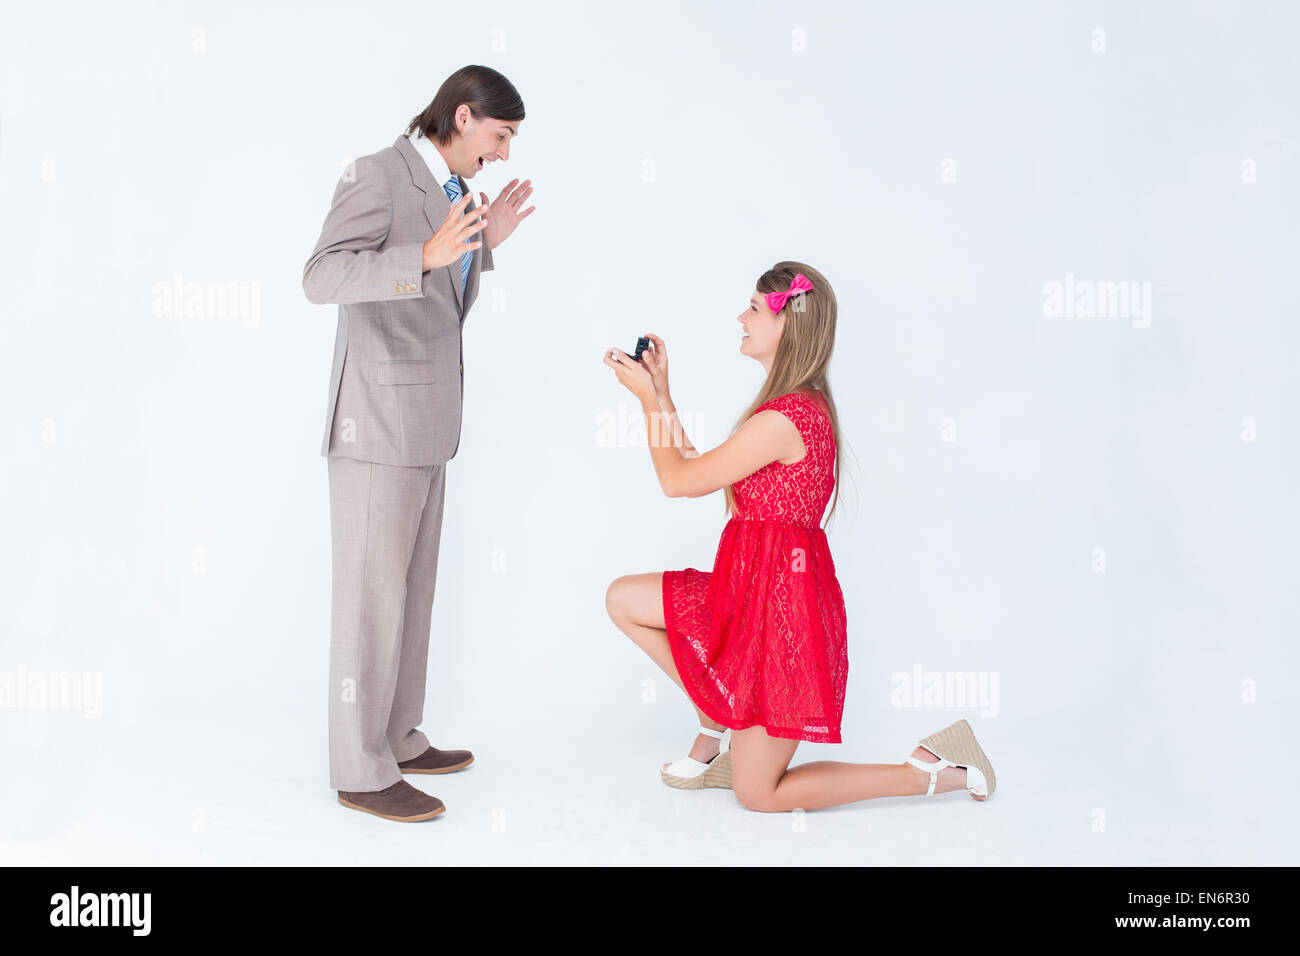 Pretty hipster on bended knee doing a marriage proposal to her boyfriend Stock Photo